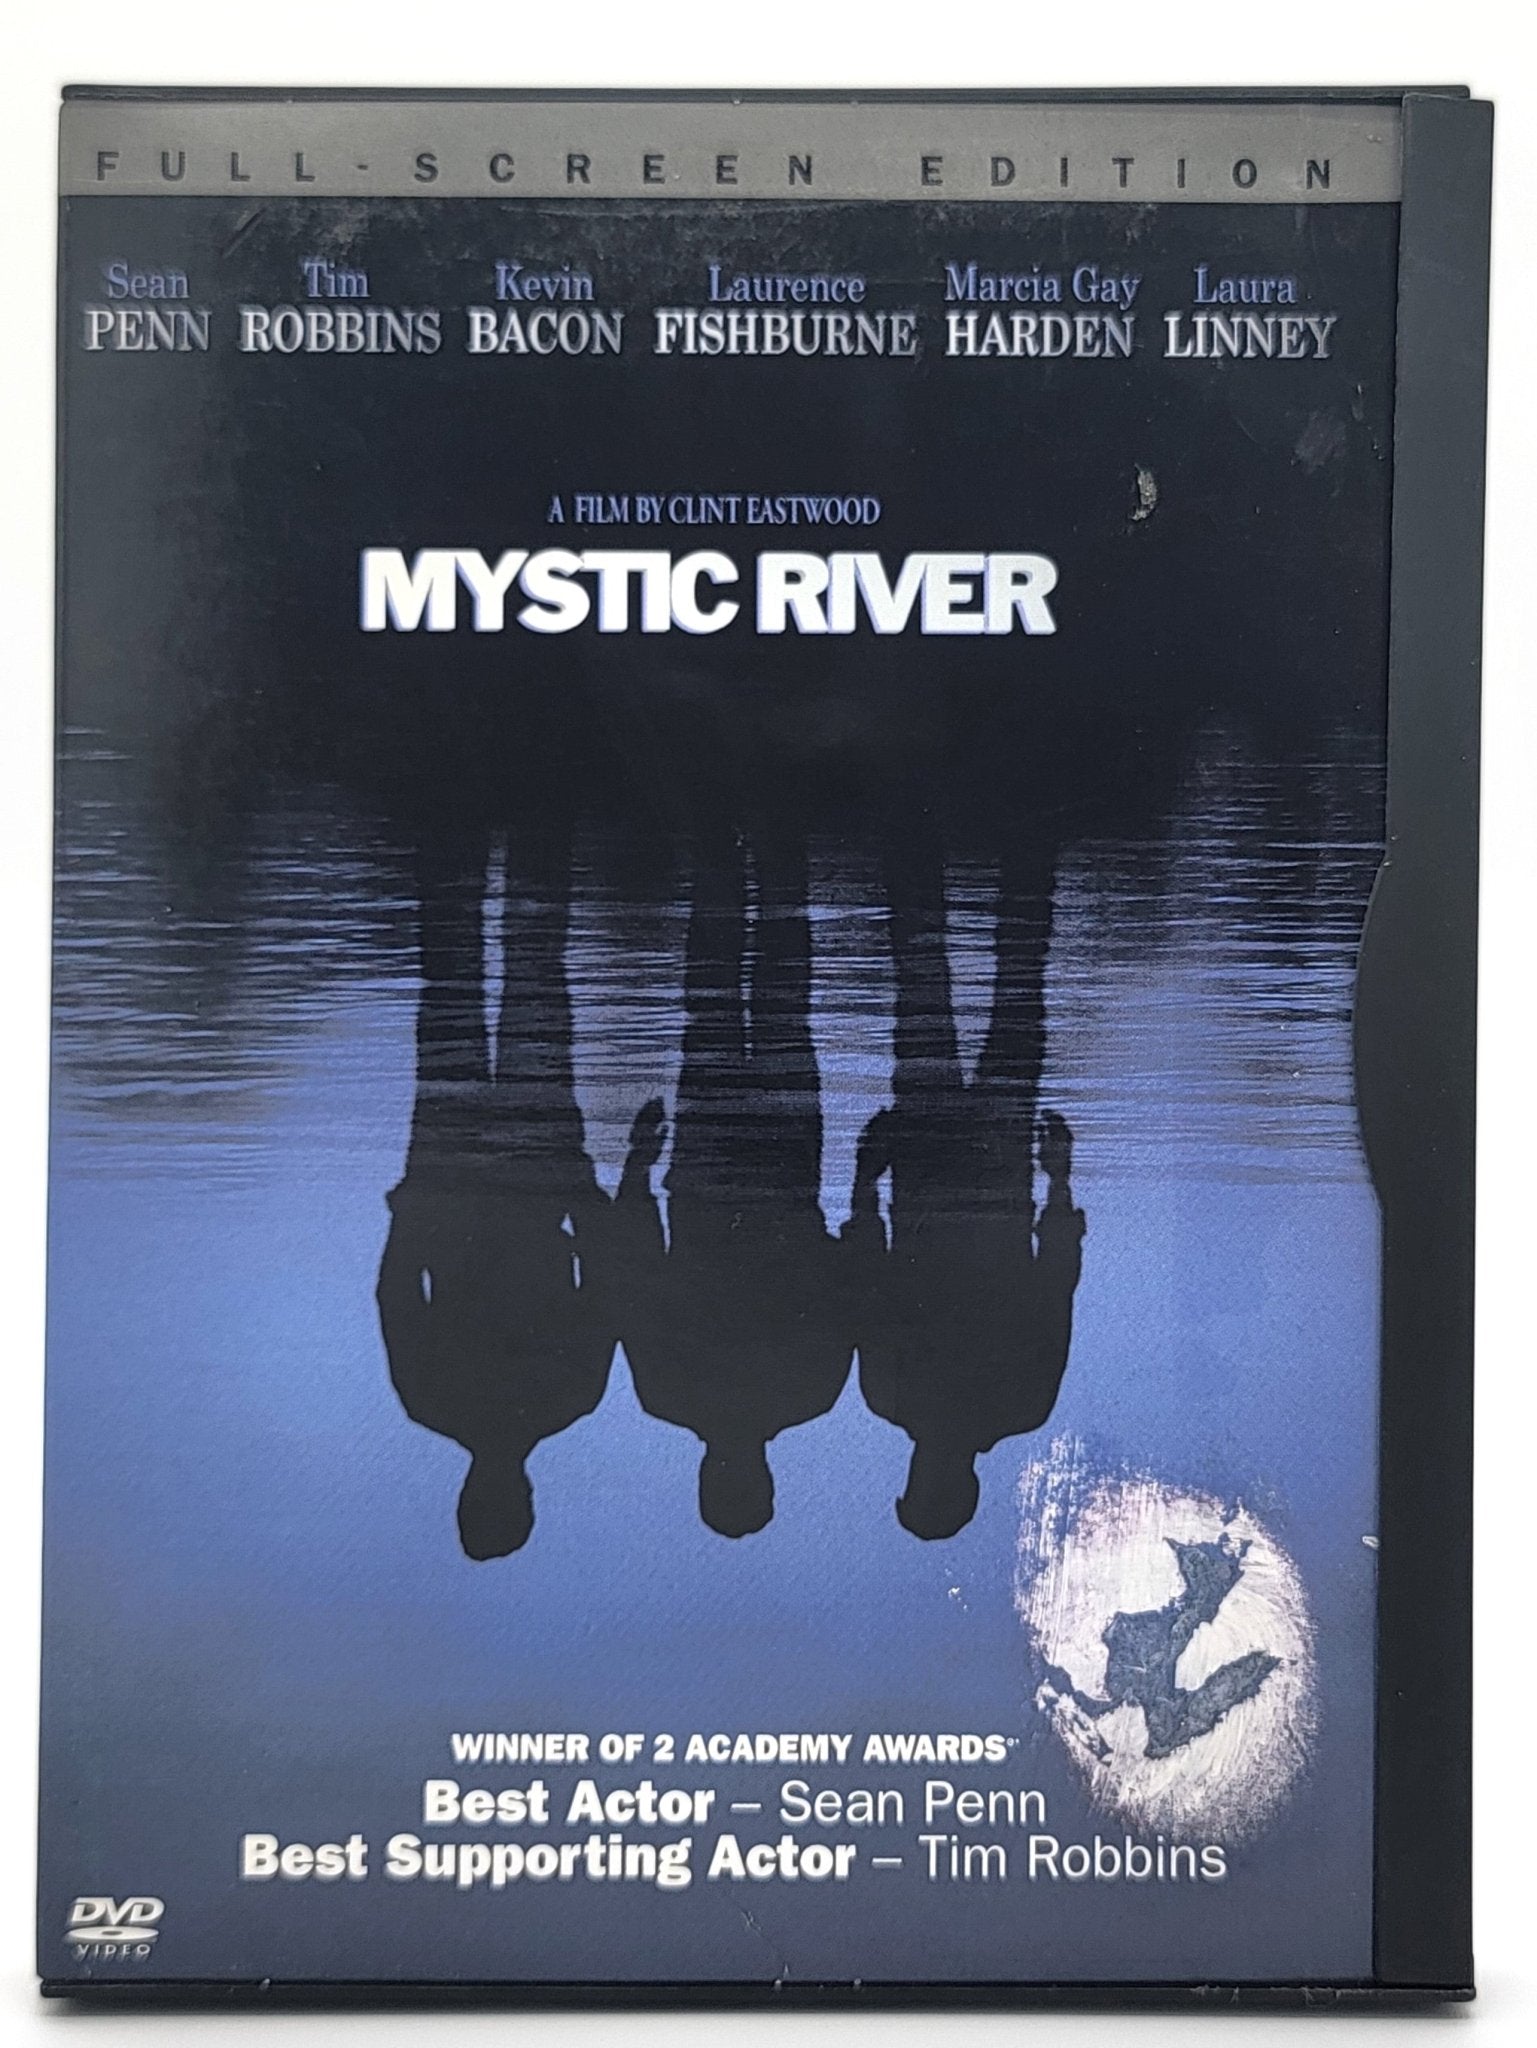 Warner Brothers - Mystic River| Full Screen - dvd - Steady Bunny Shop